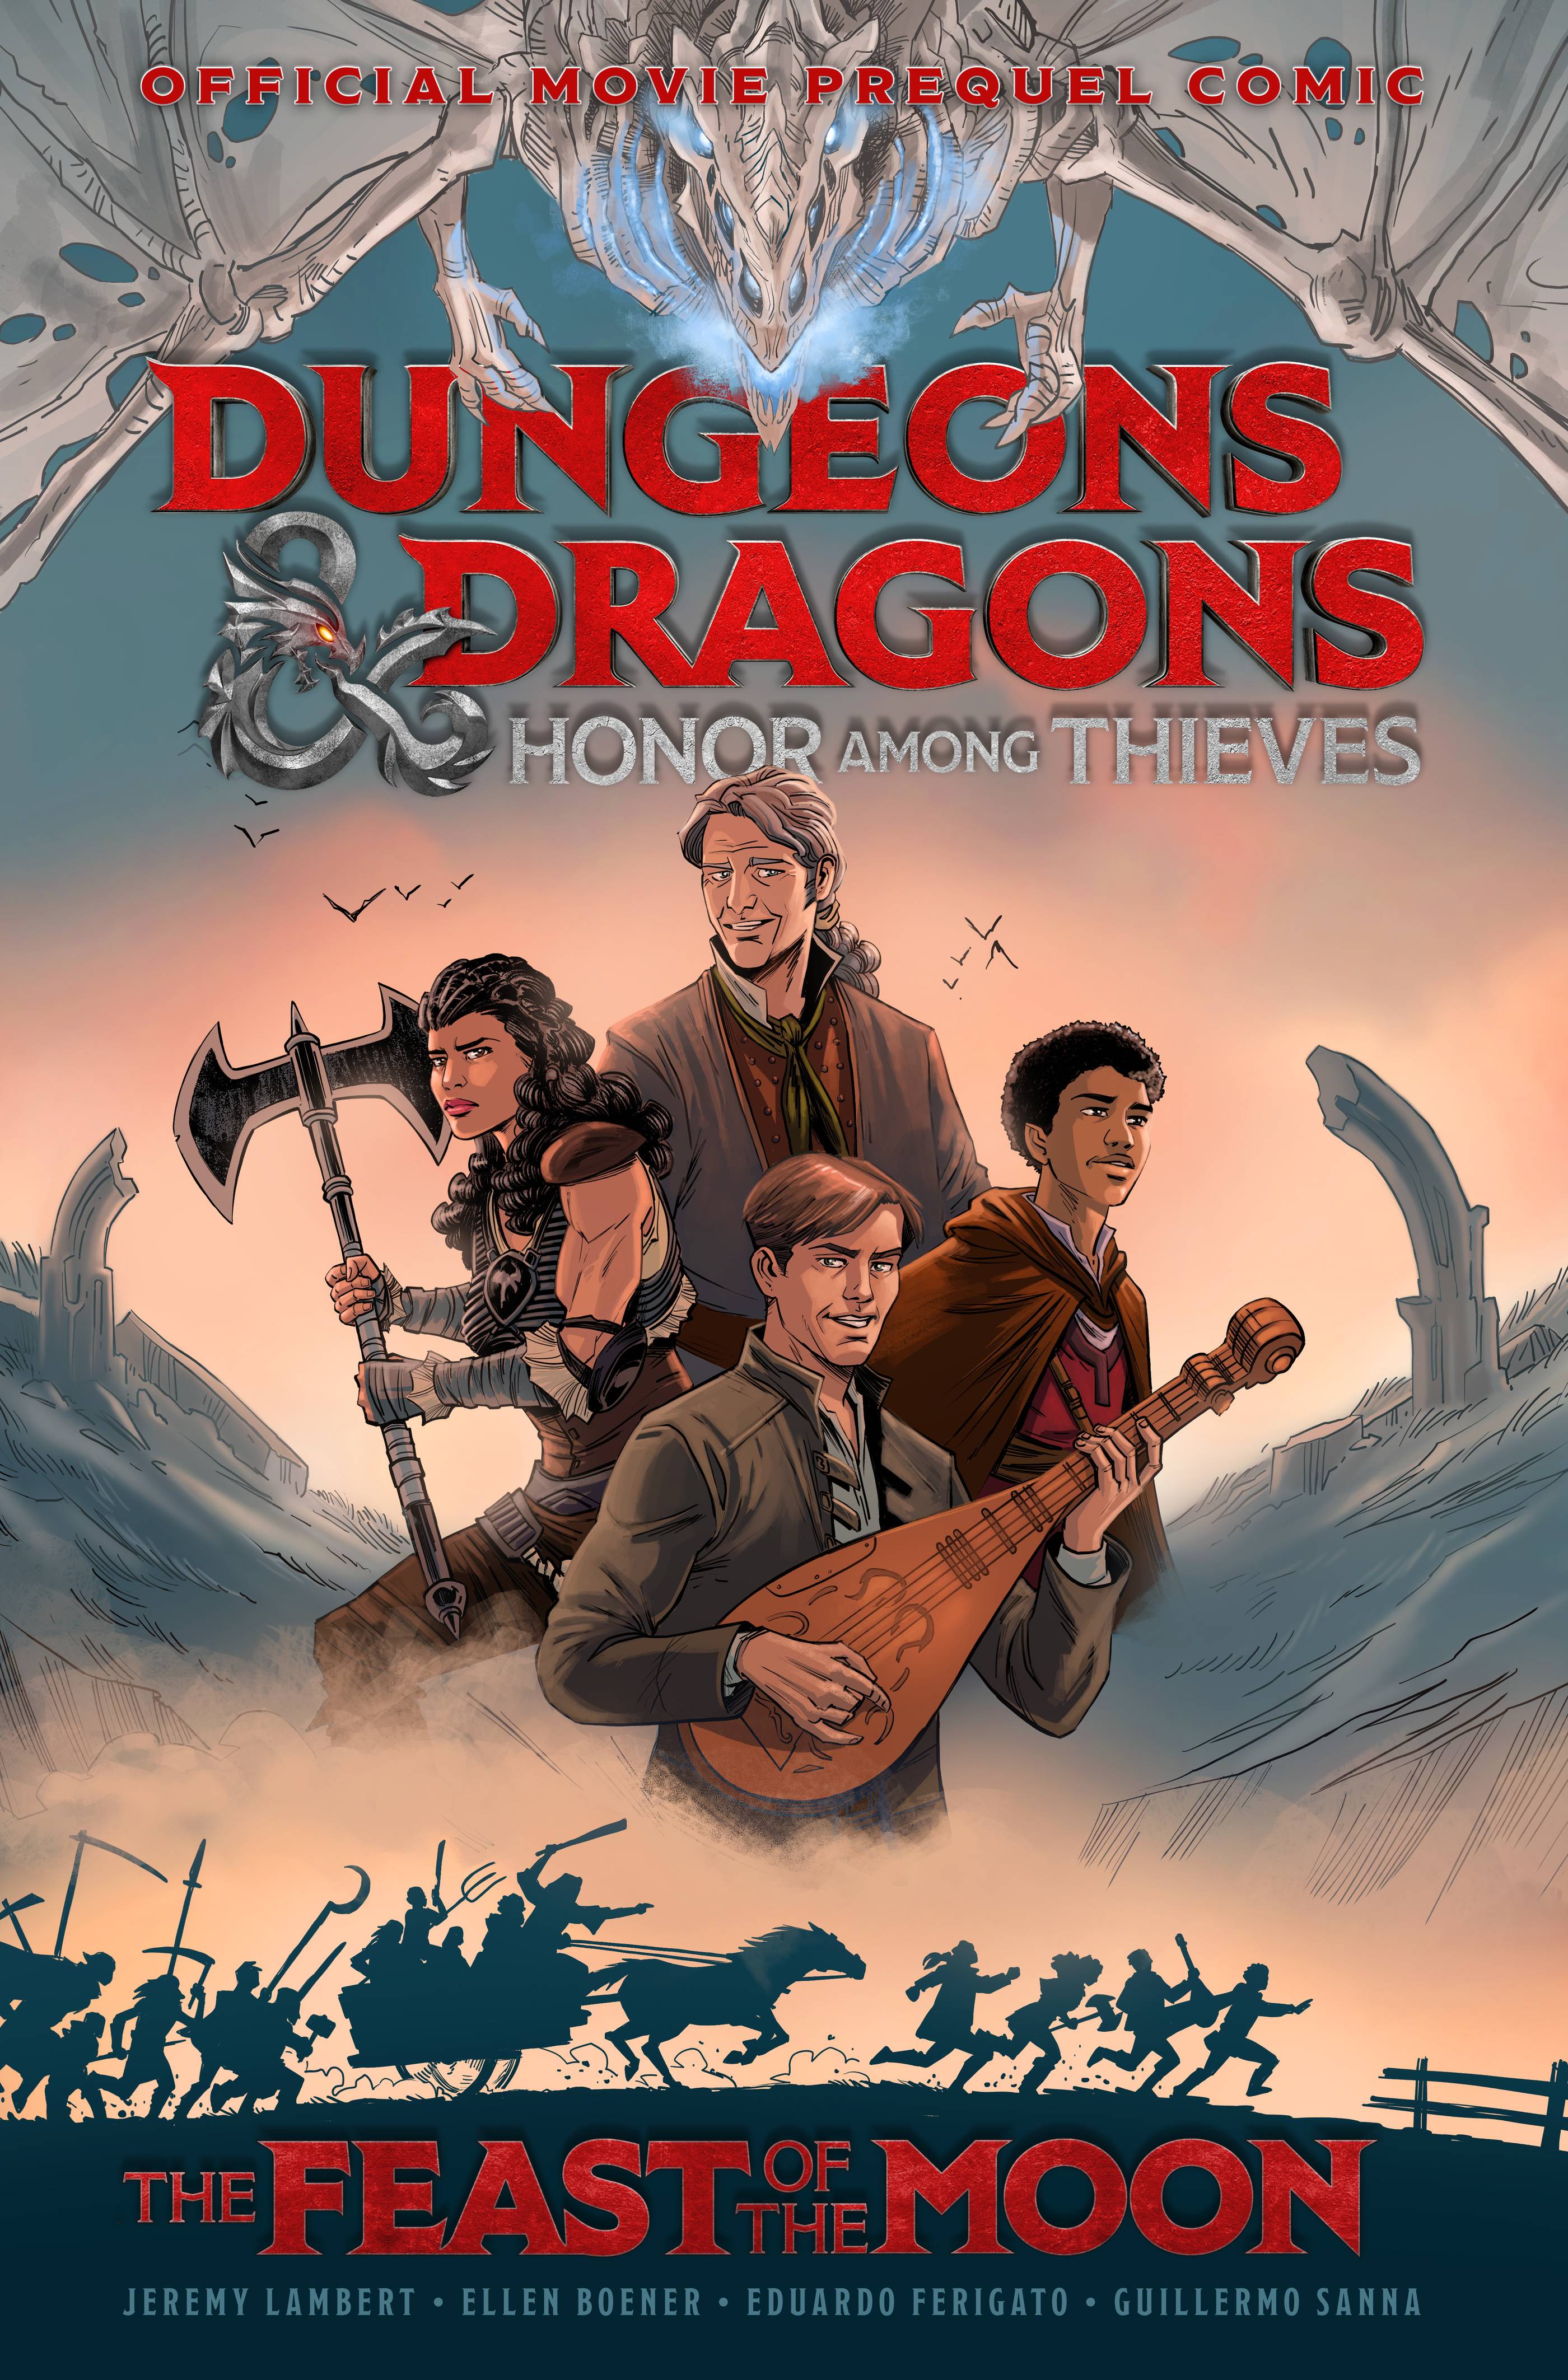 Dungeons and Dragons movie release date, cast & more